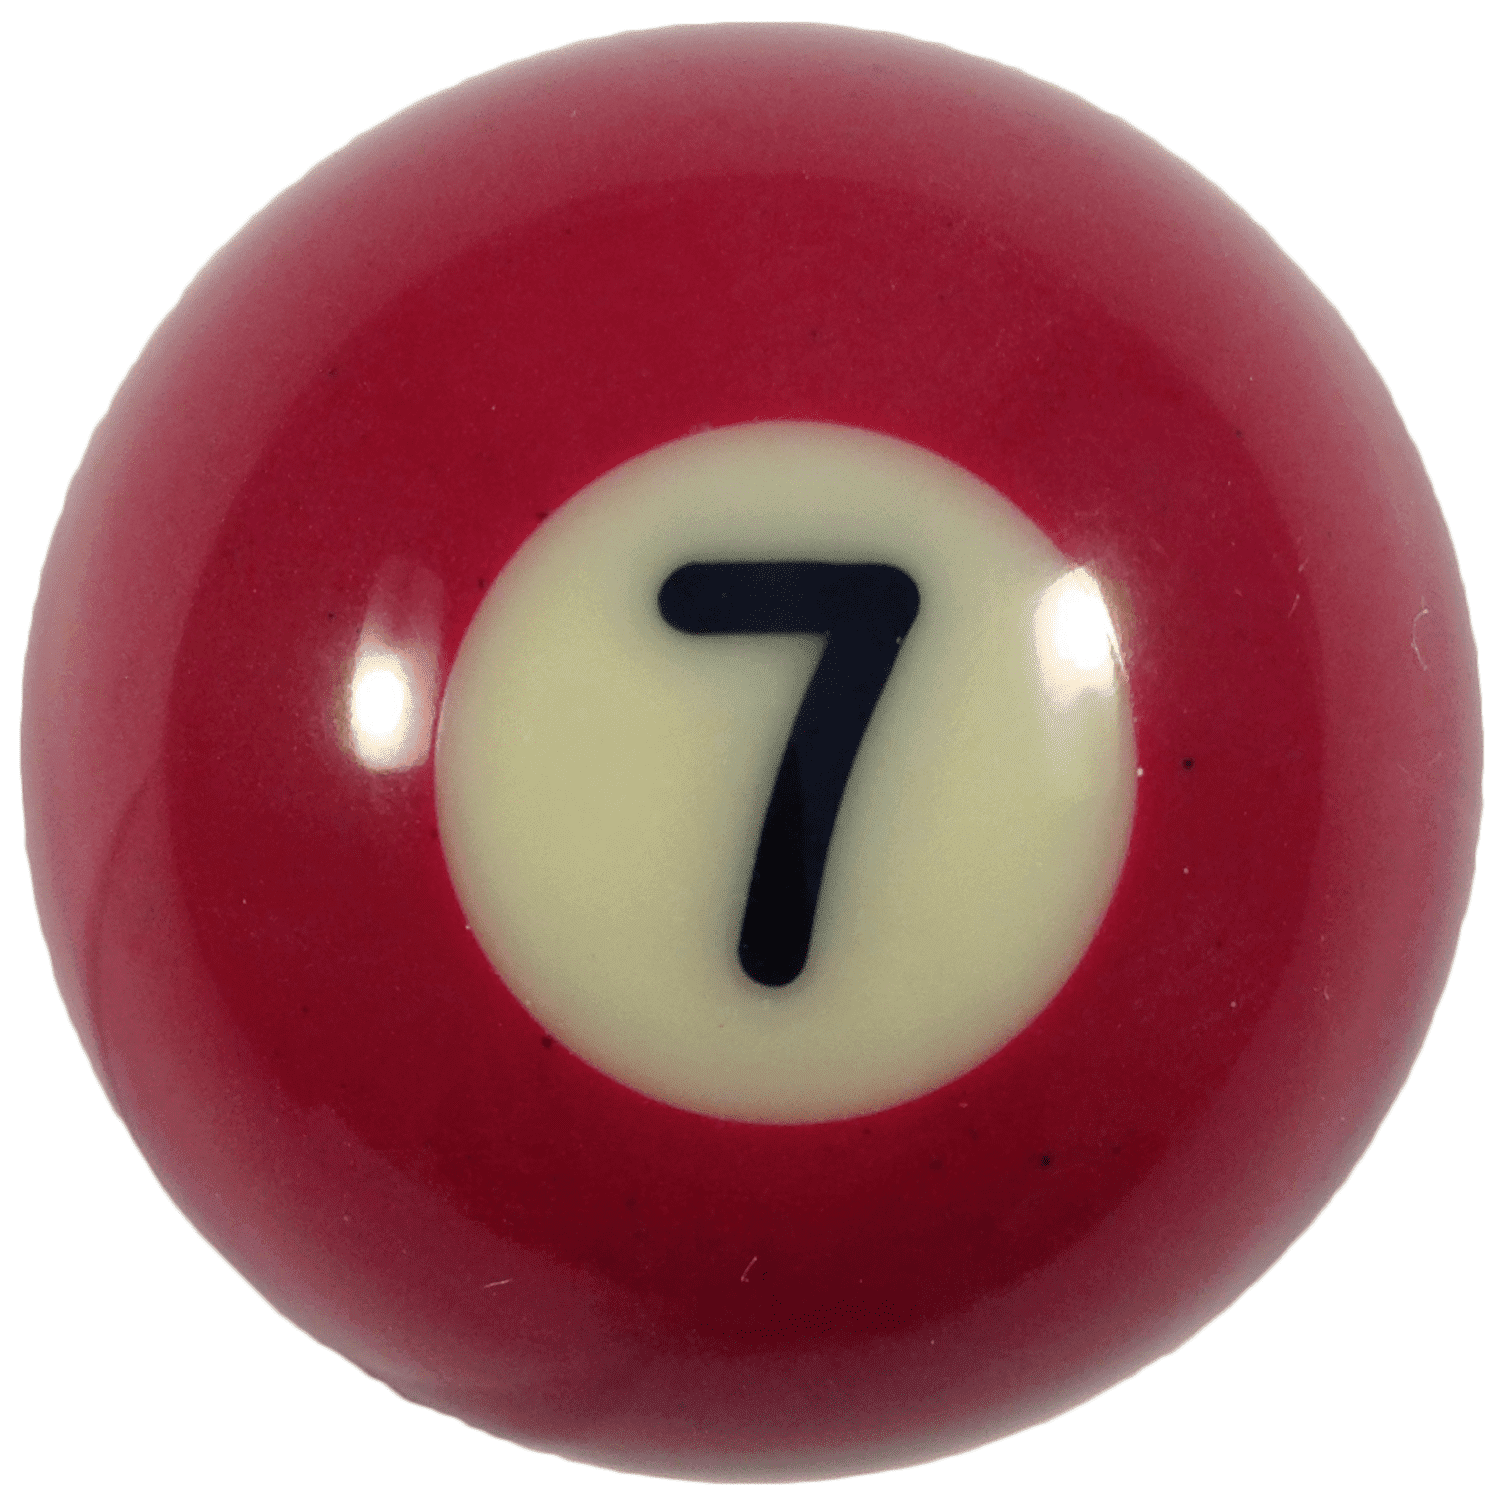 Details about   Replacement Billiard / Pool Ball 2.25" Diameter Used. s Select your Ball # 